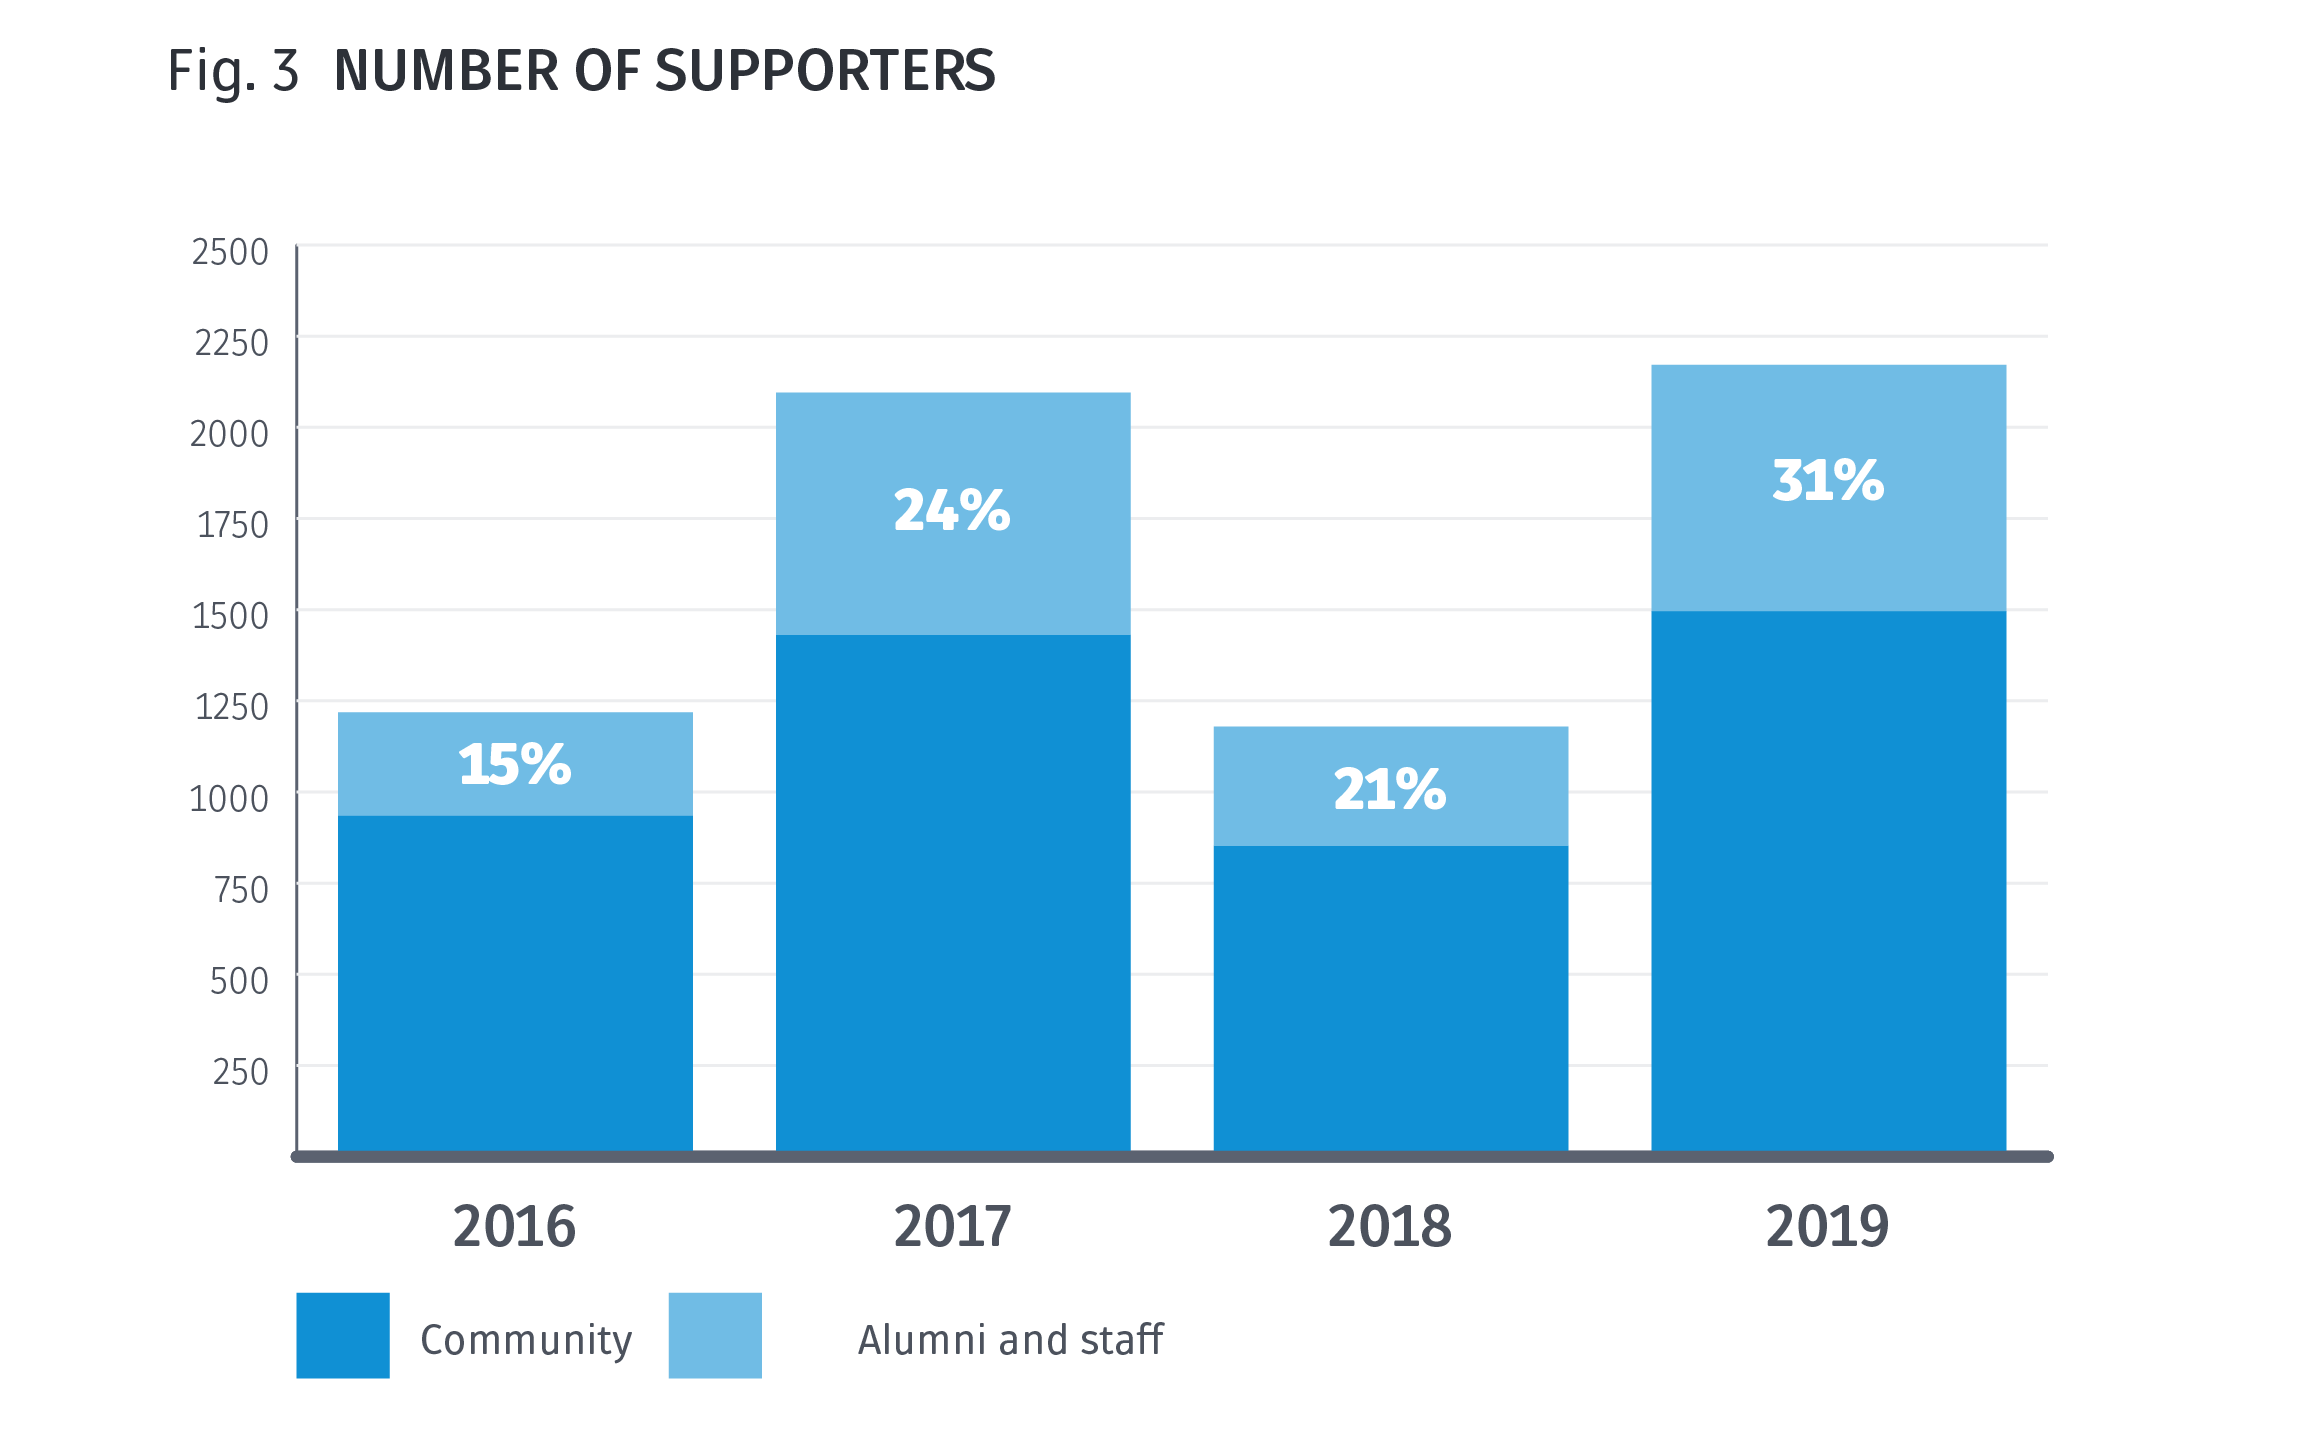 Number of supporters chart